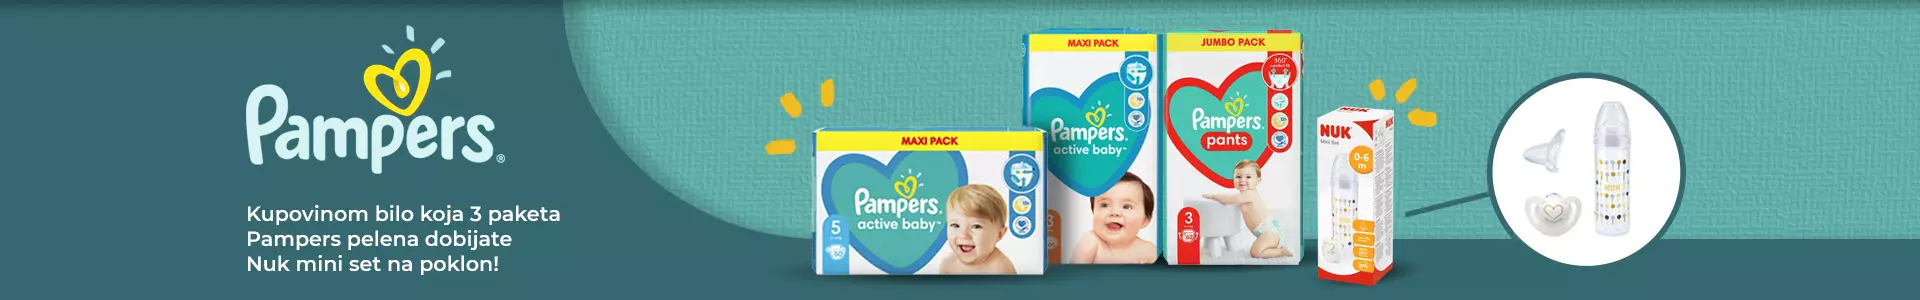 pampers nuk